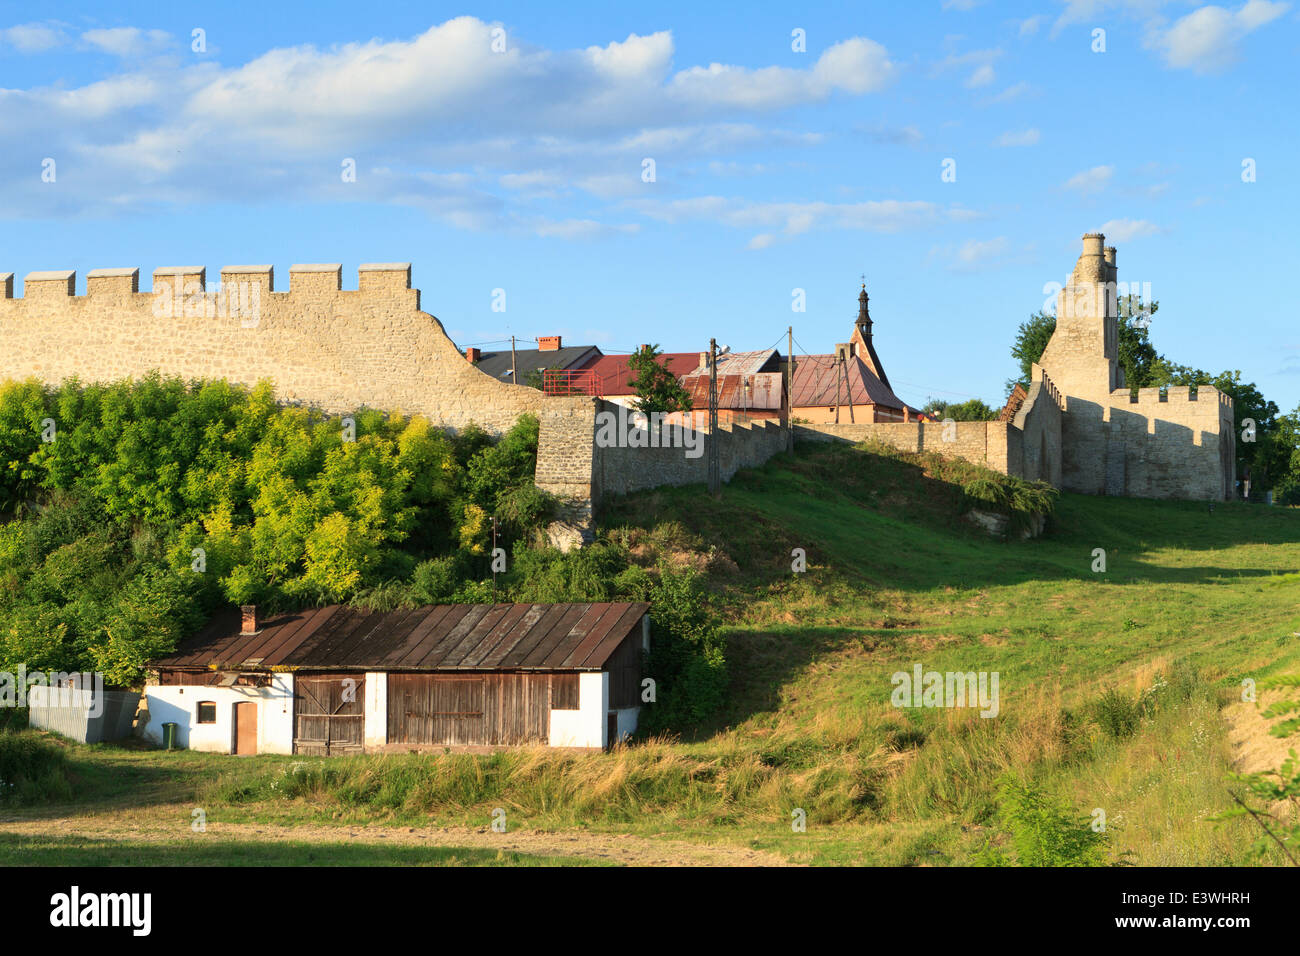 Szydlow - old town with medieval center, ruins of castle and a 700-meter long defensive wall, swietokrzyskie, Poland. Stock Photo